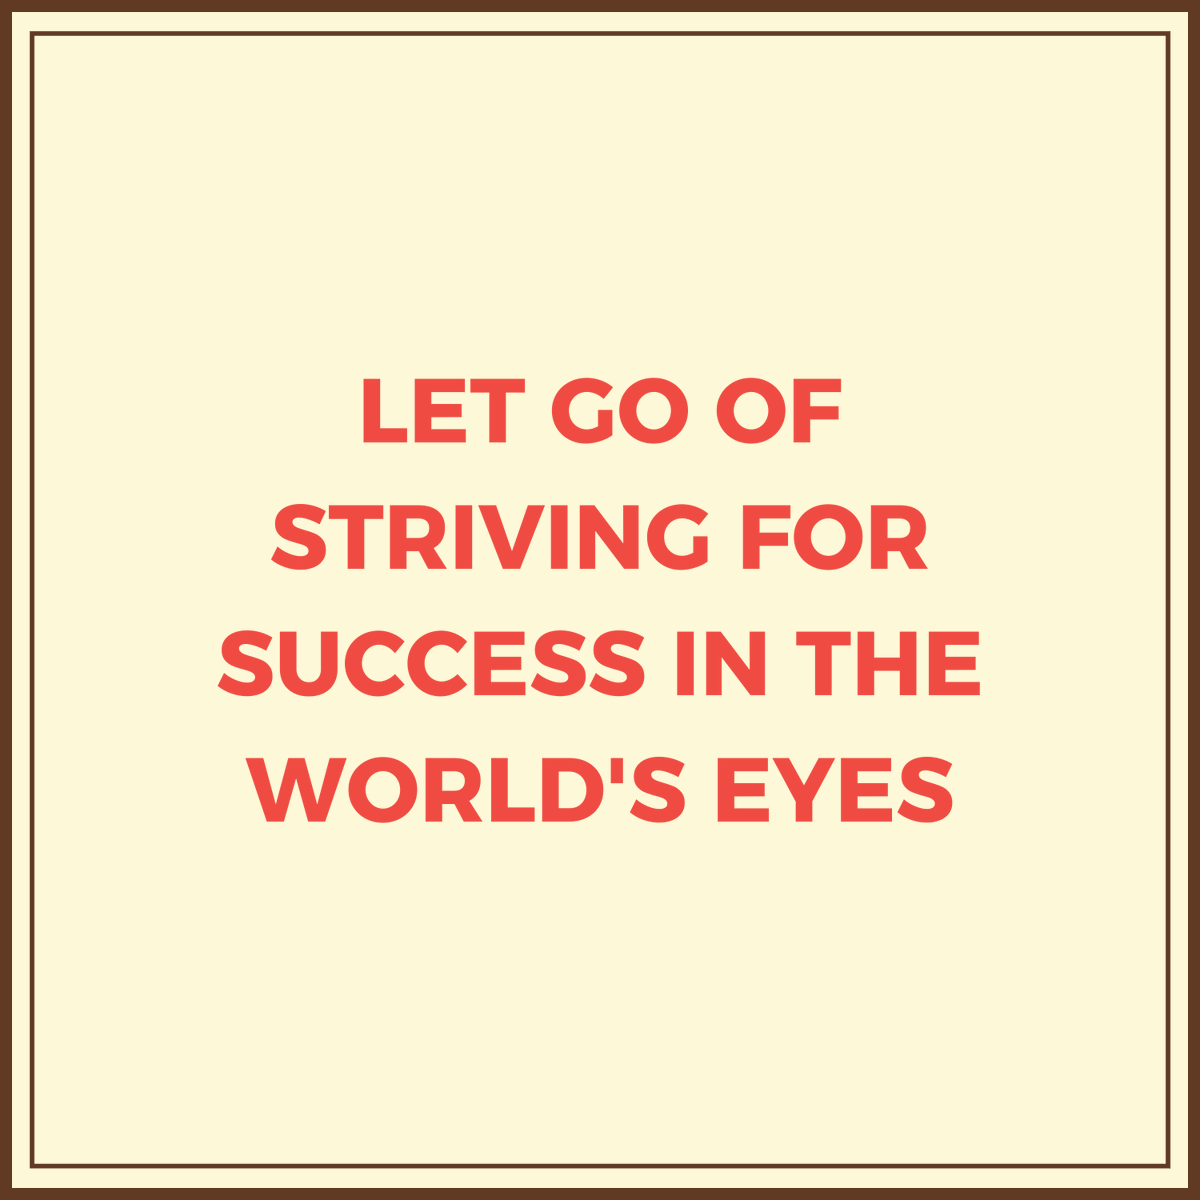 Feeling unfulfilled despite achievements? Discover the secret to true fulfillment—living the way Jesus lived. Let go of striving for success in the world's eyes and instead seek the joy that comes from embracing His way. #TrueFulfillment #LivingLikeJesus